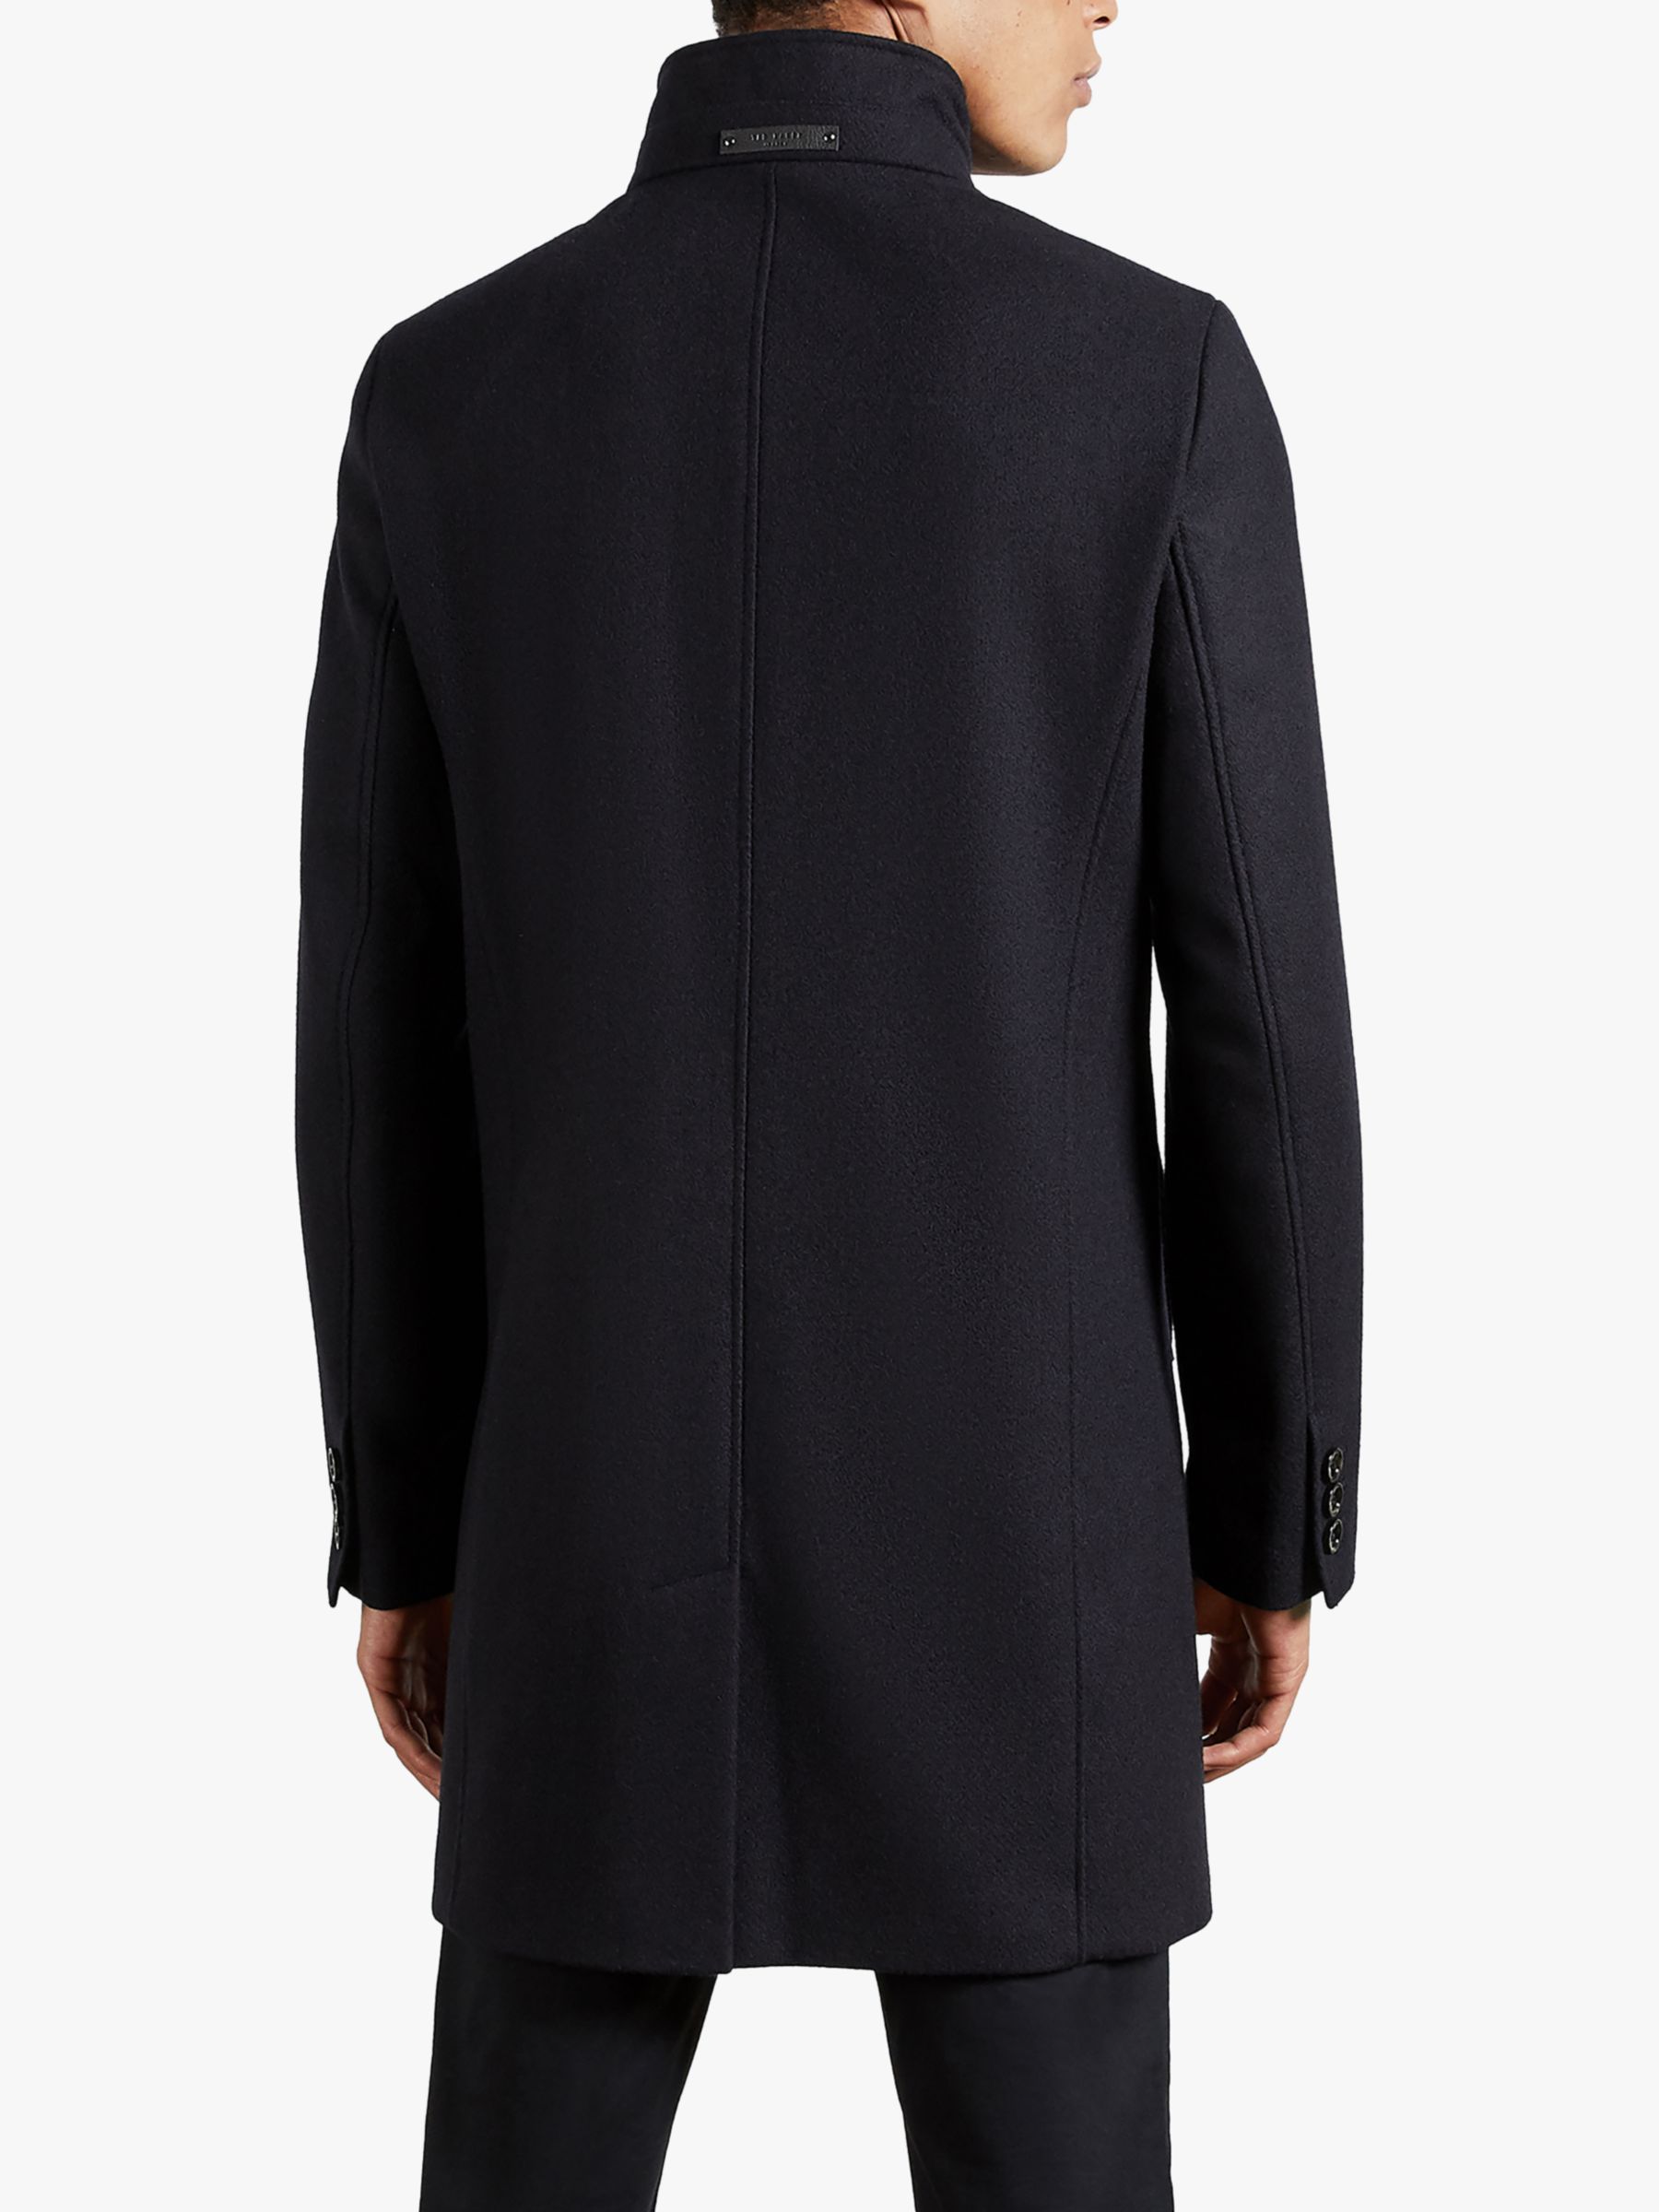 Ted Baker Rockies Tailored Coat